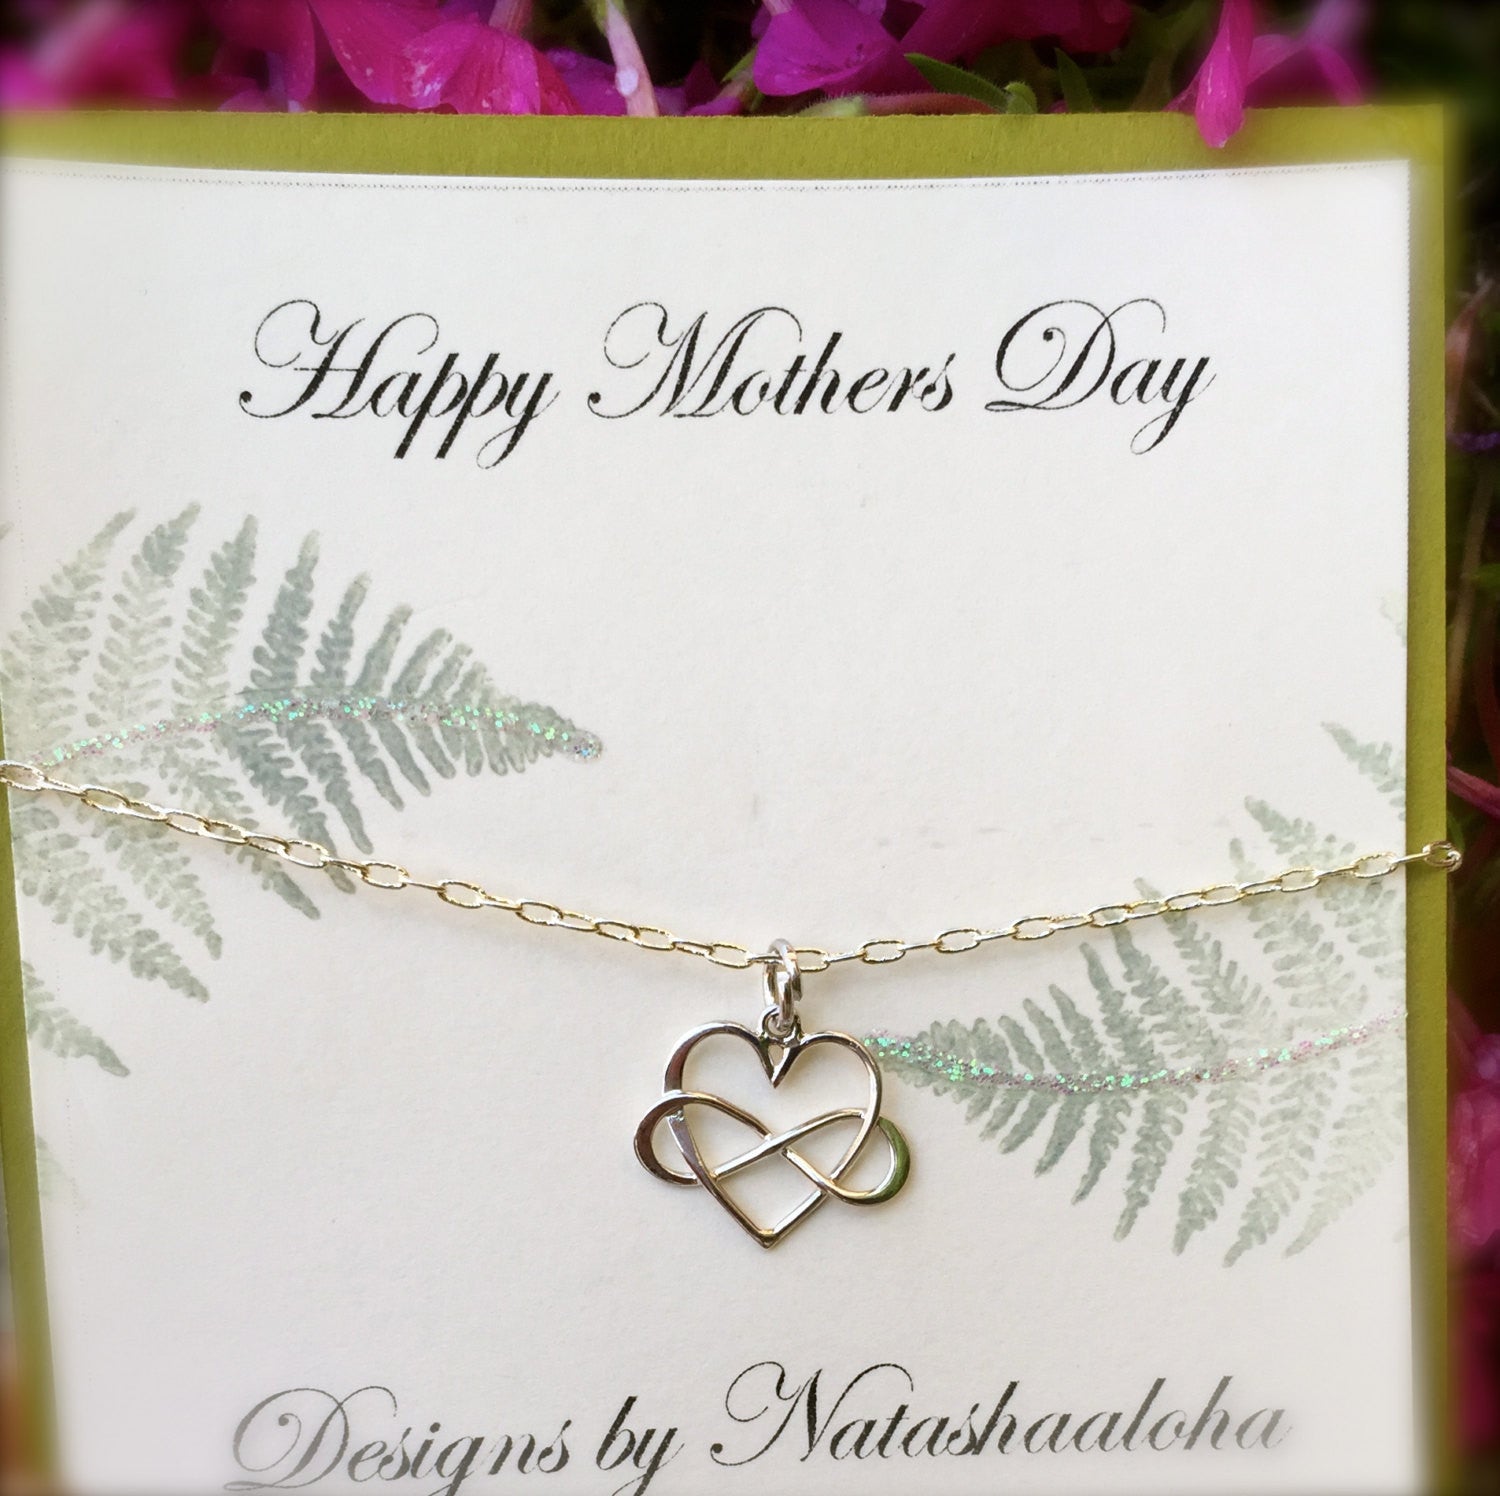 Mom Necklace,  Mother Daughter Jewerly, Heart Infinity Necklace, Tied Together Forever Friends,Bridesmaid Necklace, natashaaloh - Natashaaloha, jewelry, bracelets, necklace, keychains, fishing lures, gifts for men, charms, personalized, 